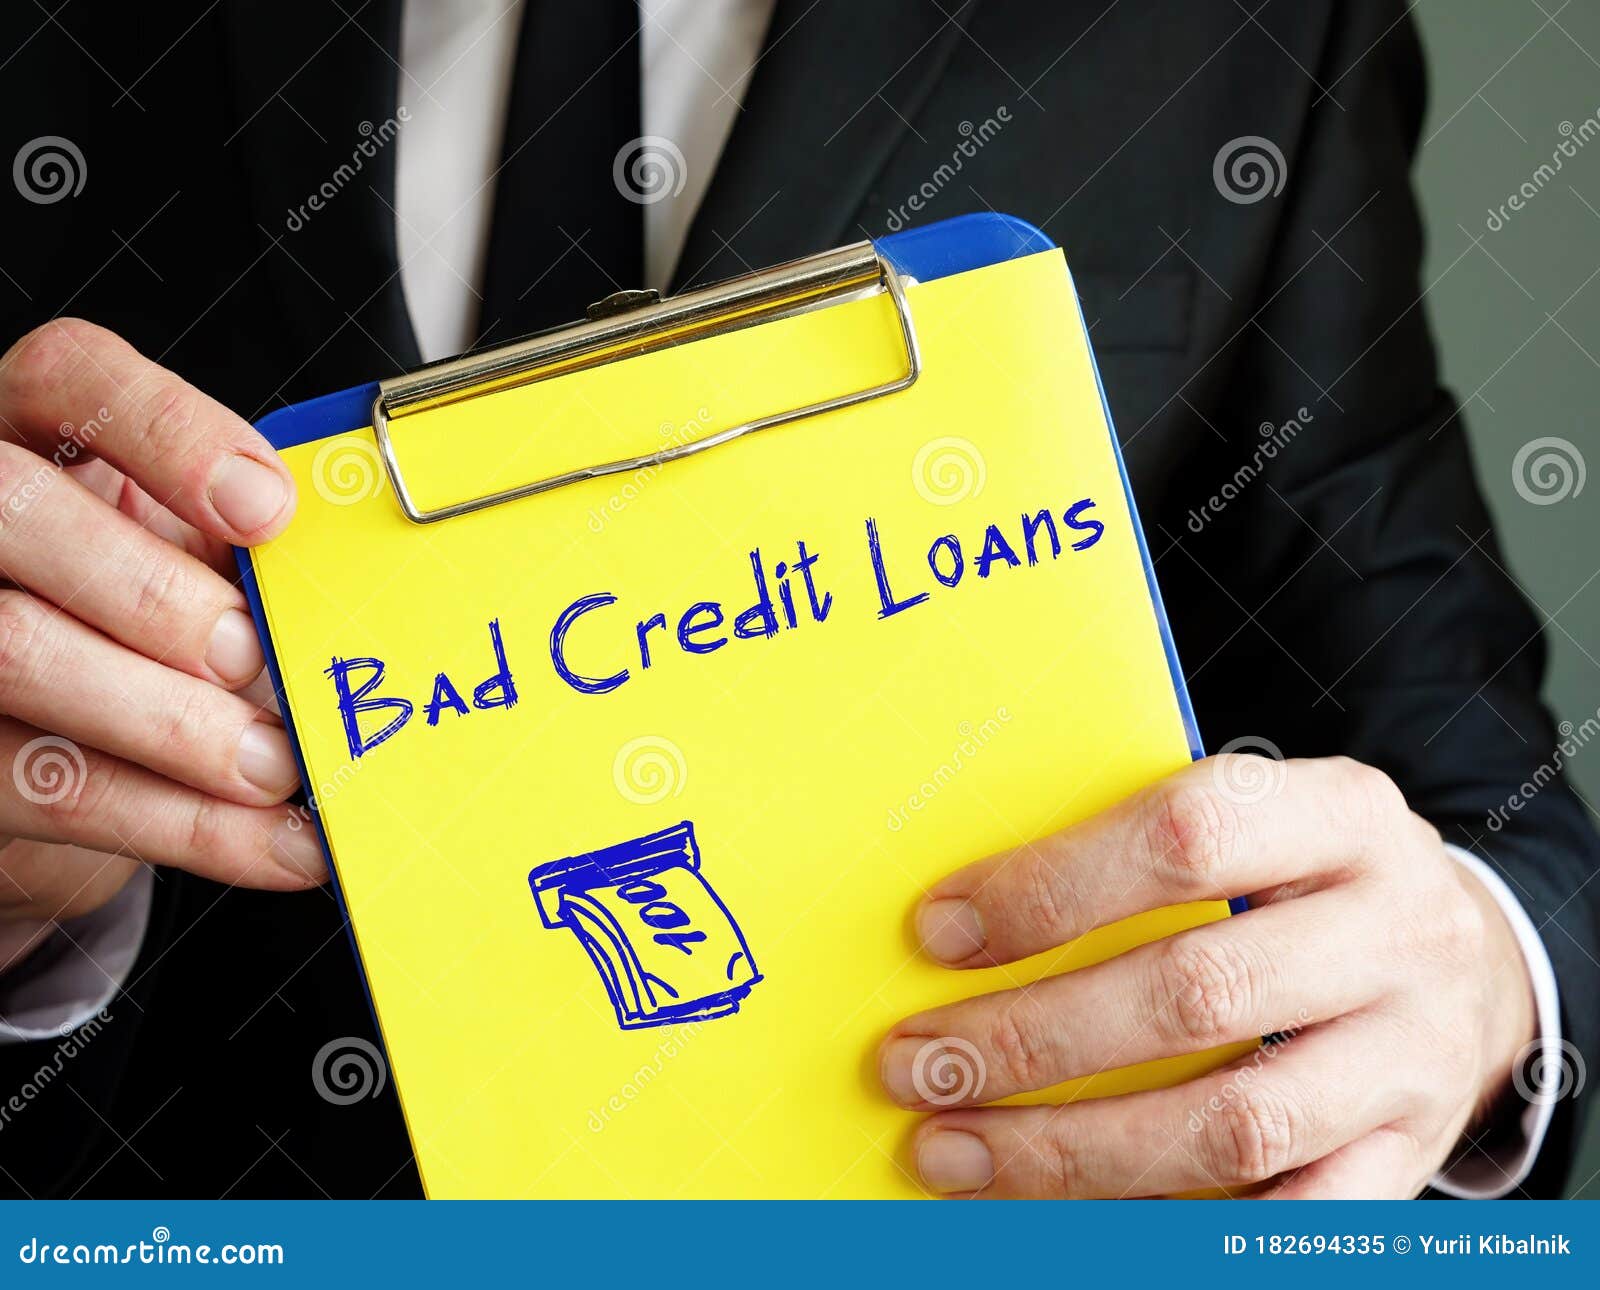 How 5 Stories Will Change The Way You Approach Instant Bad Credit Loans